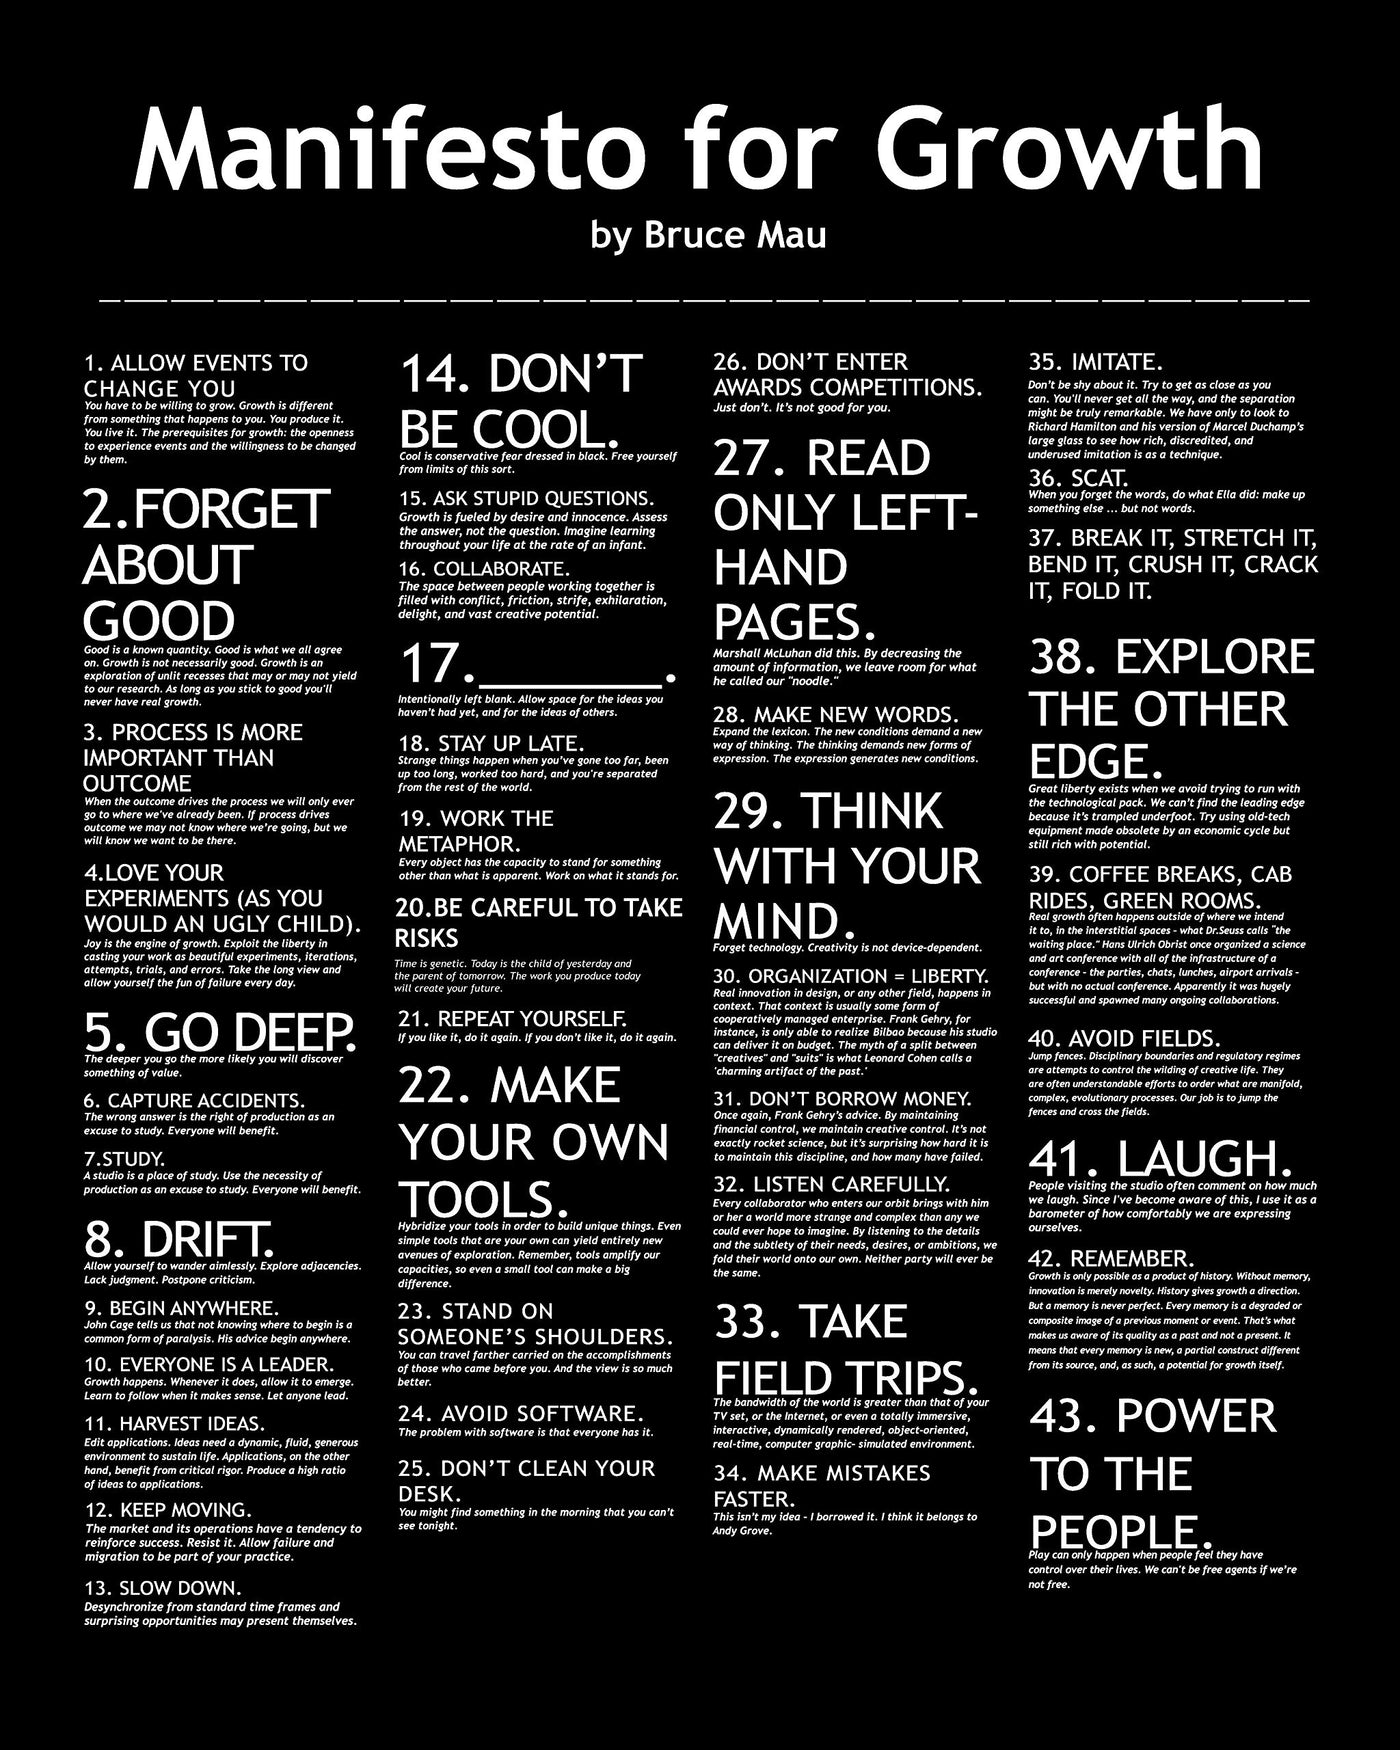 Bruce Mau-"Manifesto for Growth" Motivational Quotes Wall Sign -11 x 14" Modern Inspirational Poster Print-Ready to Frame. Positive Home-Office-School-Work-Gym Decor. Perfect Life Lessons for All!